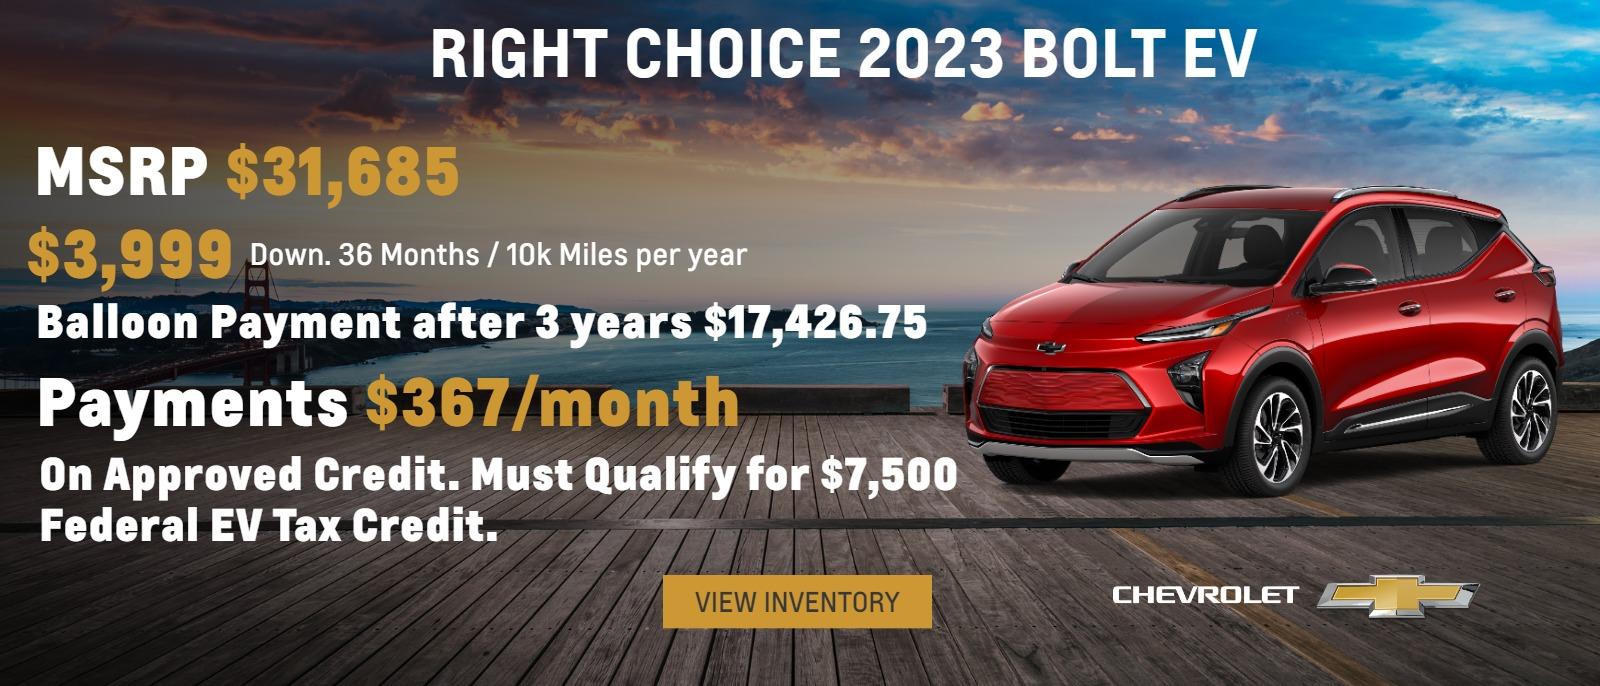 MSRP $31,685
$3999 Down
36 Months / 10k Miles per year
Balloon Payment after 3 years $17,426.75
Payments $367/month
For Unapproved Credit. Must Qualify for $7,500 Federal EV Tax Credit.